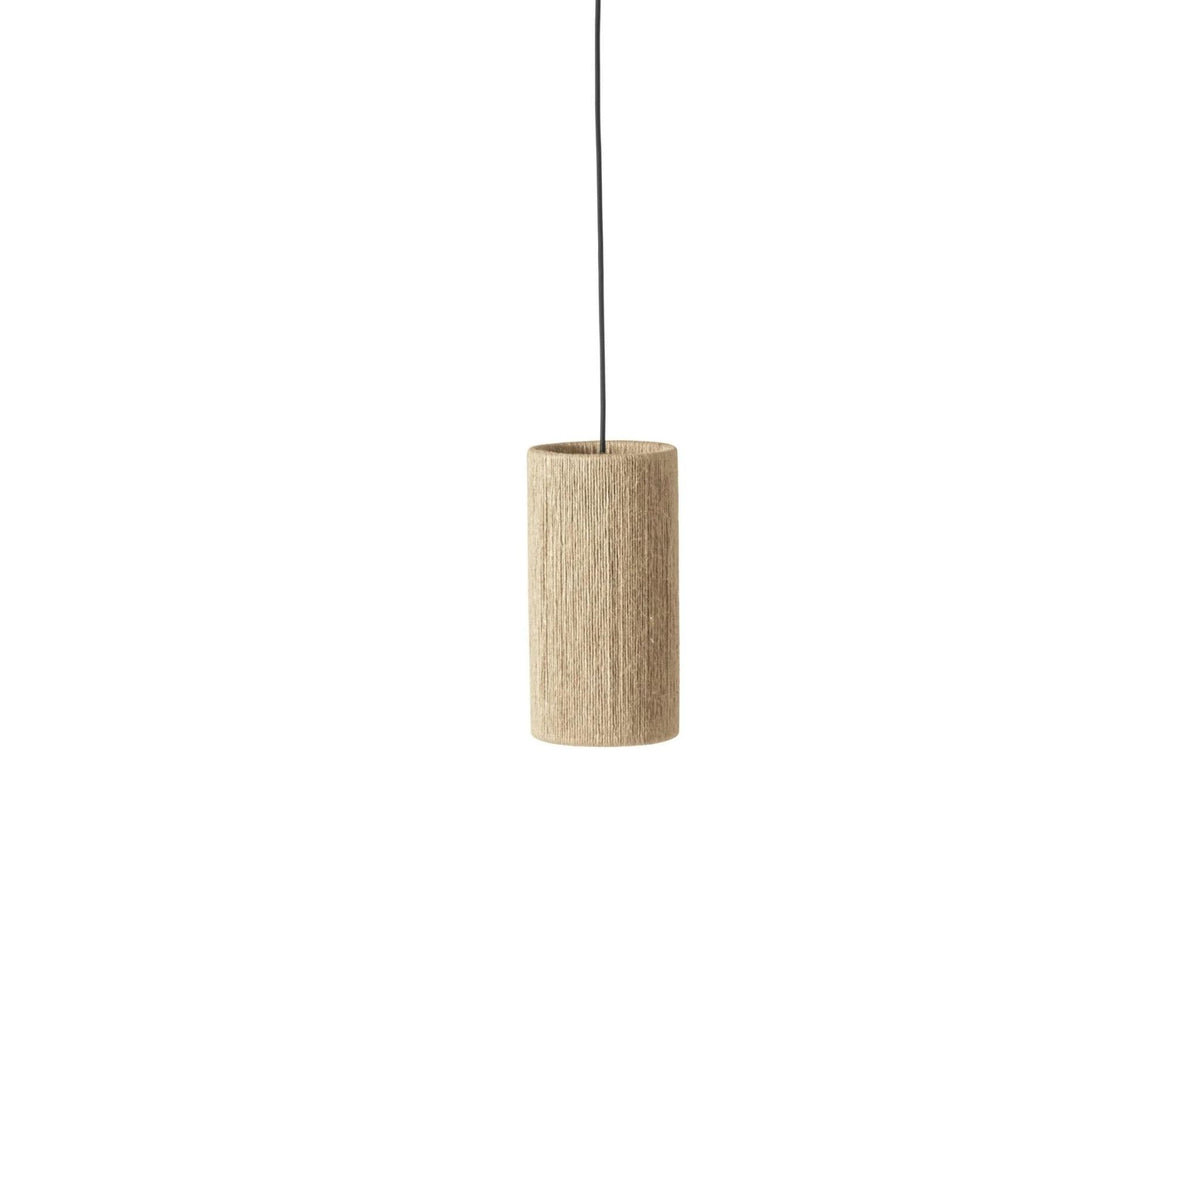 Made by Hand RO Pendant Lamp 15 by Kim Richardt